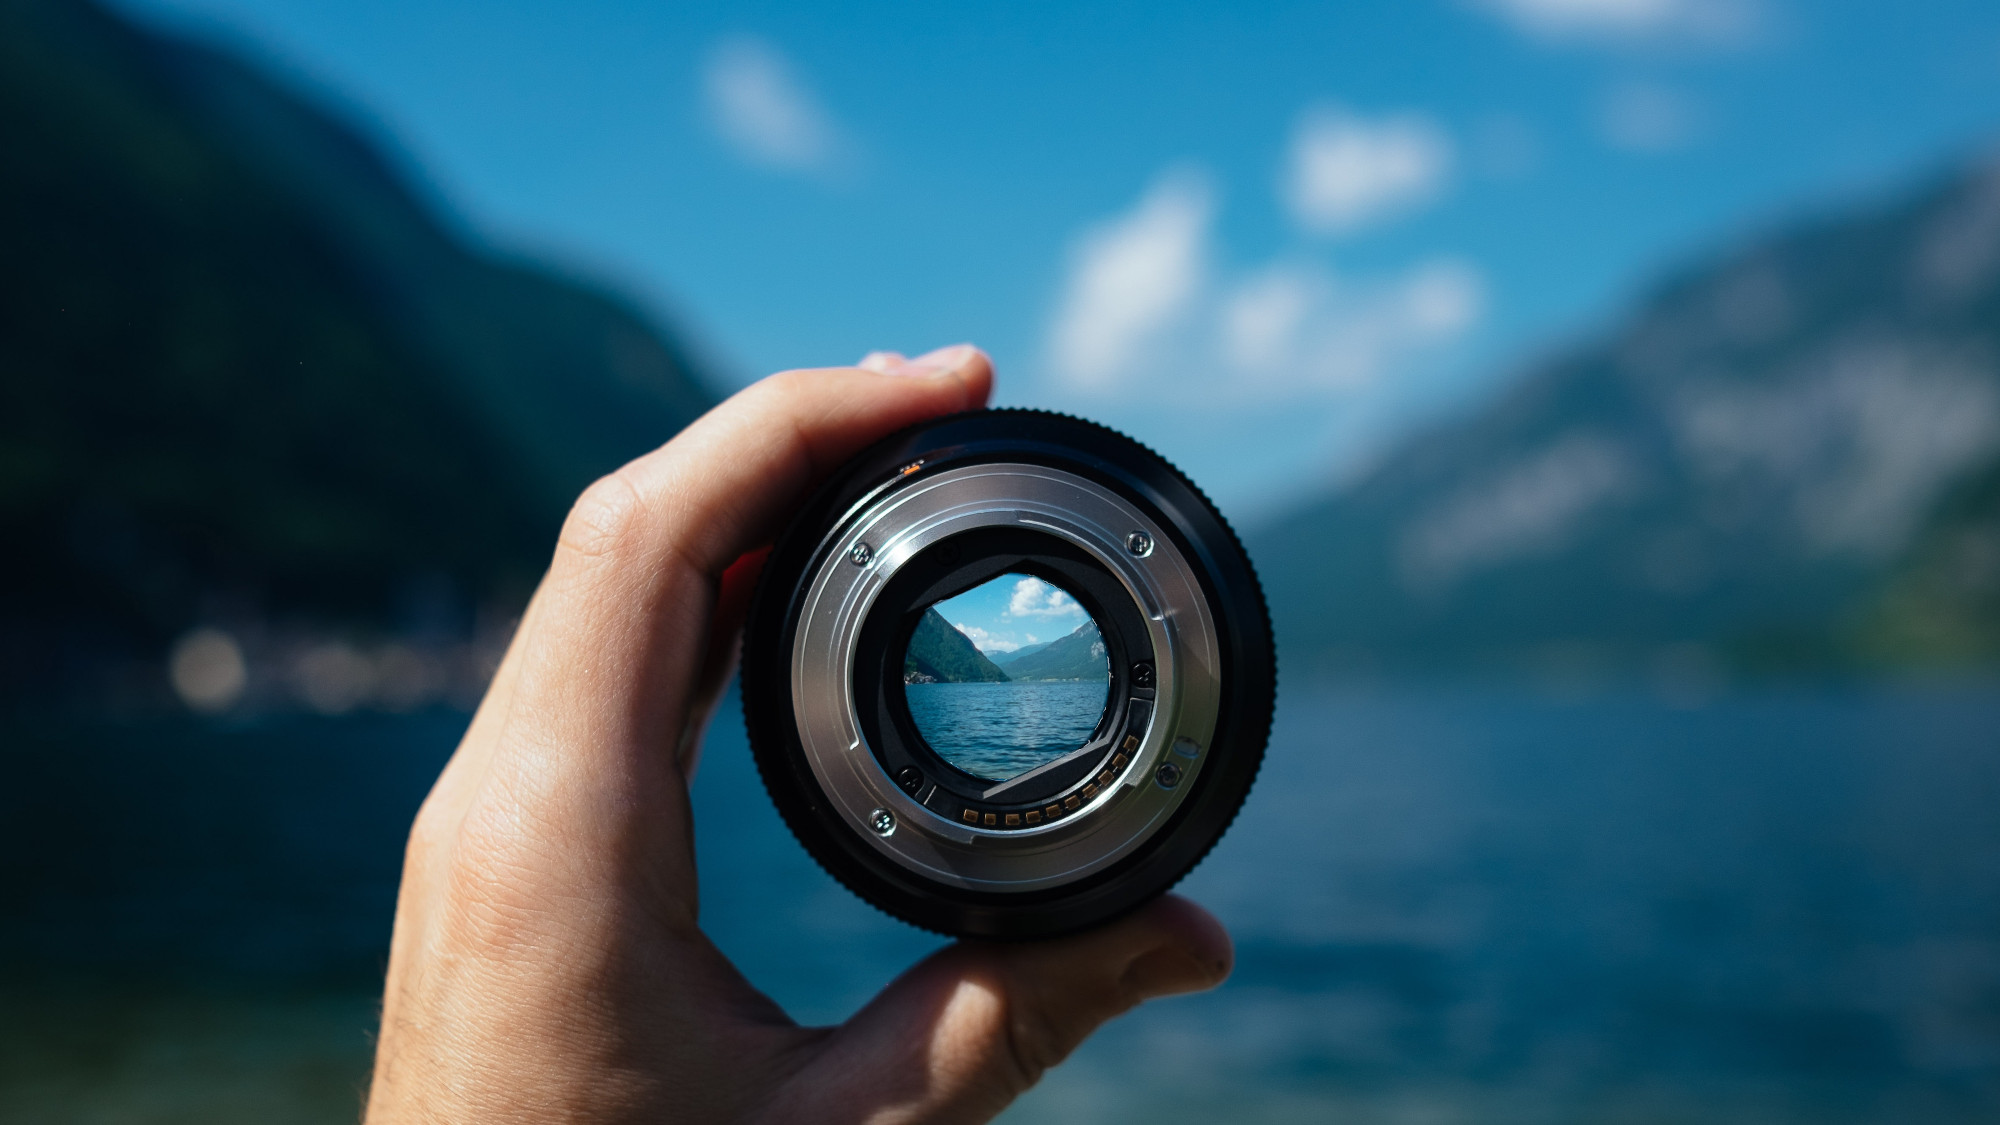 A left hand holds the lens of a photo camera in front of a blurred landscape featuring mountains, slightly rippling water and a blue slightly cloudy sky. The image inside the lens is sharp and a part of the scenery in the back can therefore be seen clearly.